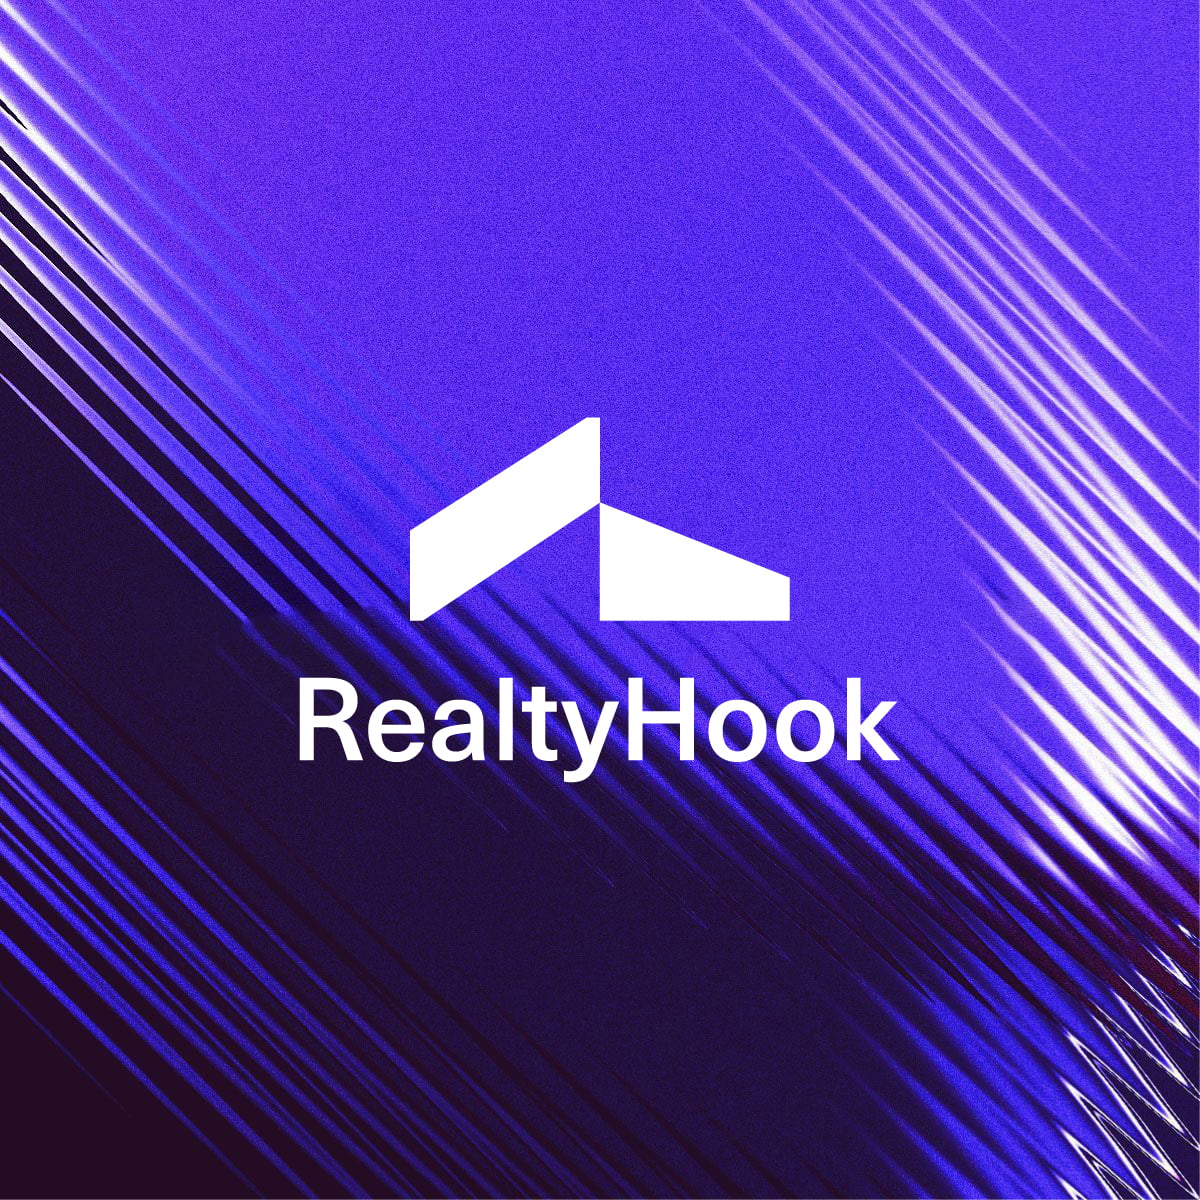 Realty Hook logo in a abstract background.